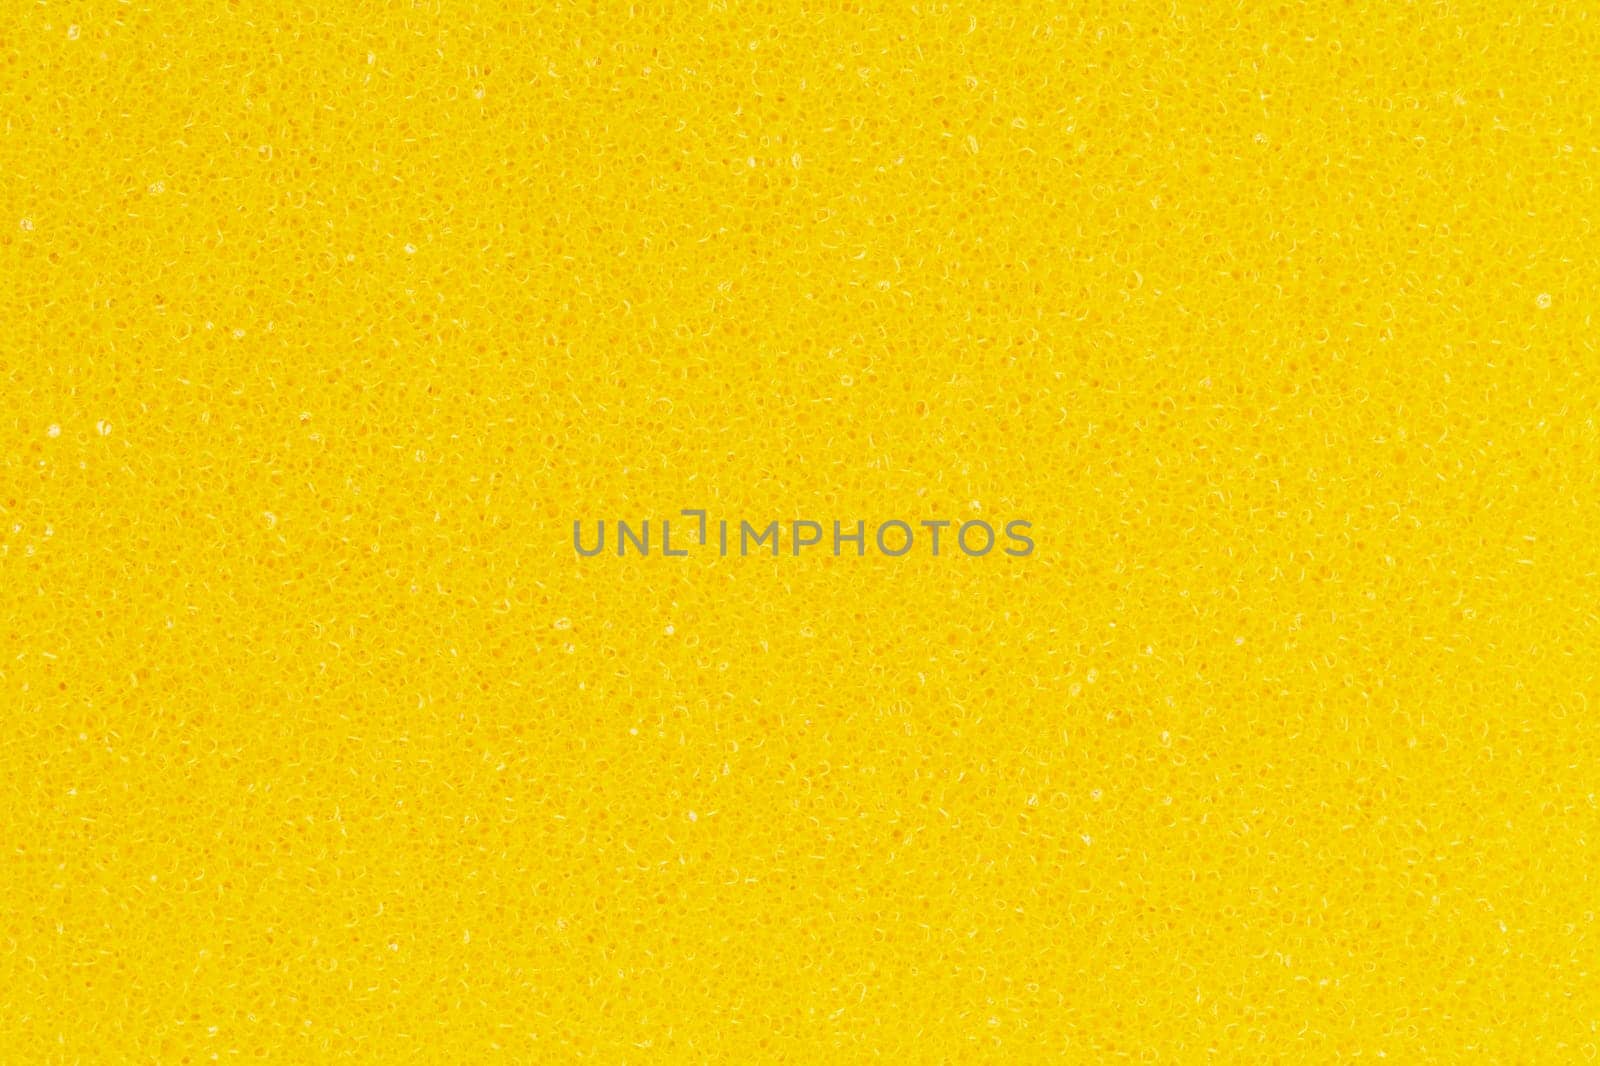 Bright yellow color foam sponge porous texture background. Extreme close-up view of detail abstract synthetic material. Horizontal composition